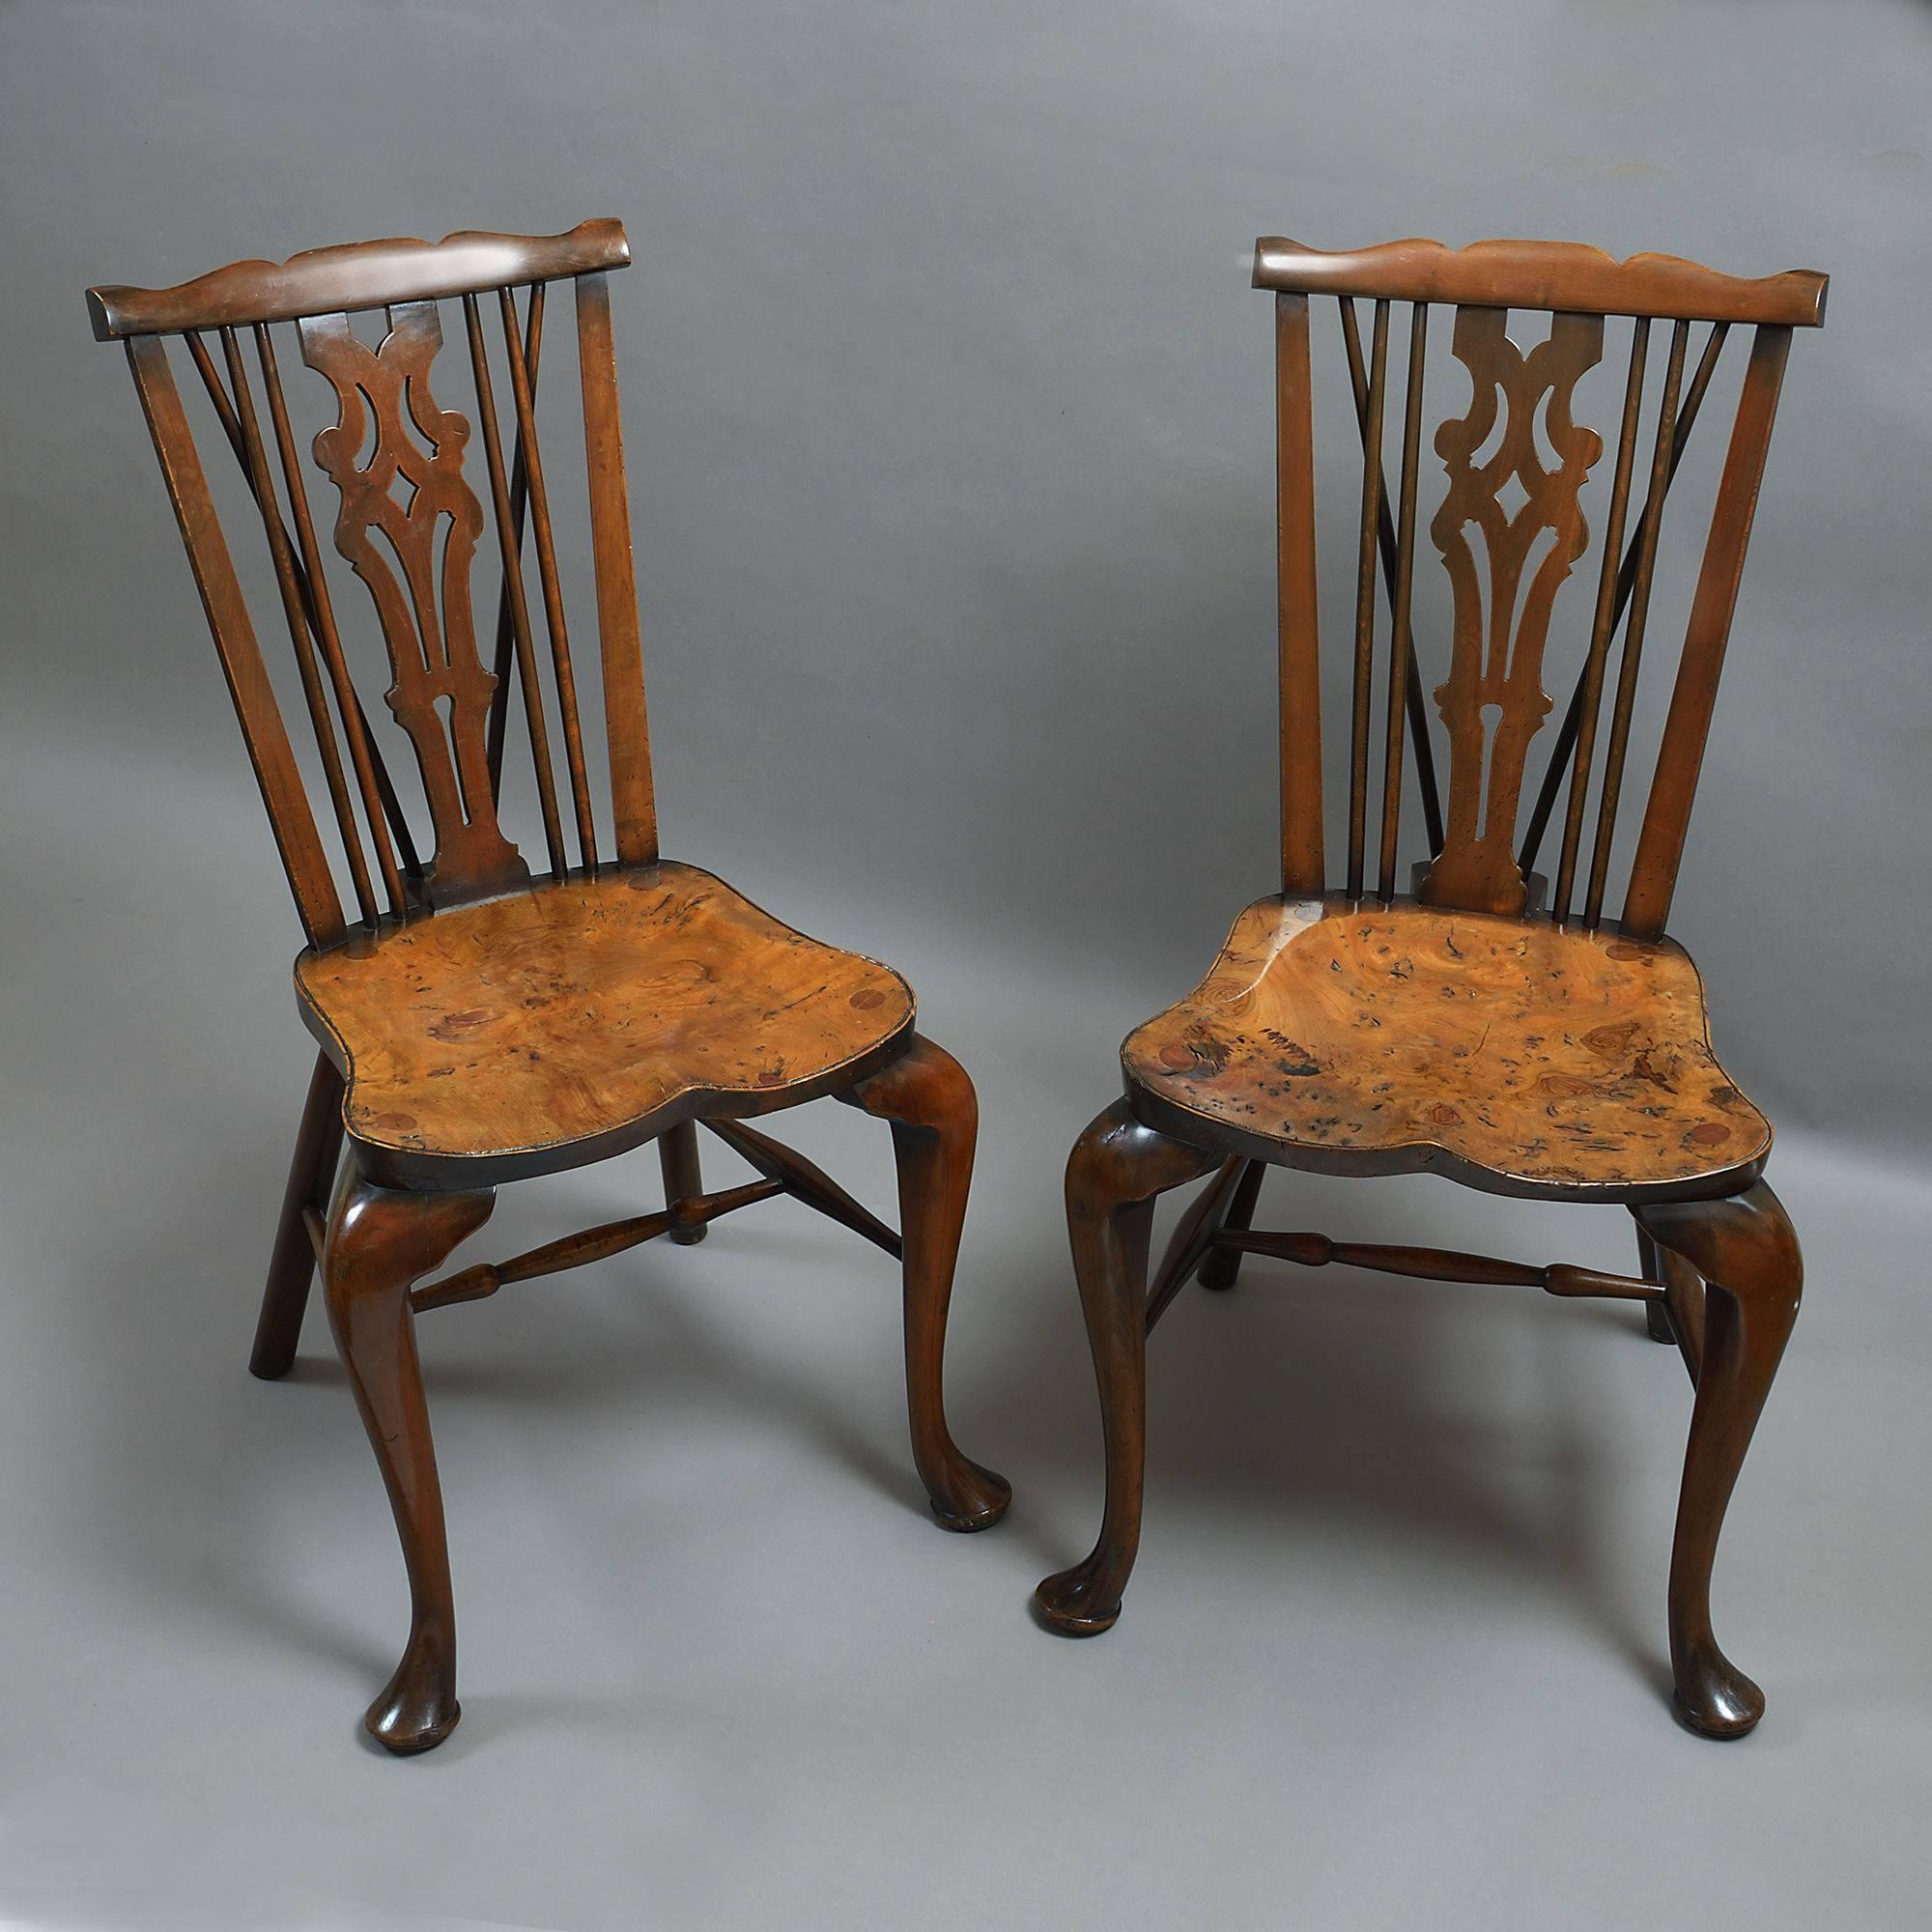 A pair of early 20th century yew wood hall chairs, having Windsor backs, finely figured burr yew saddle seats all raised upon turned legs with stretchers.